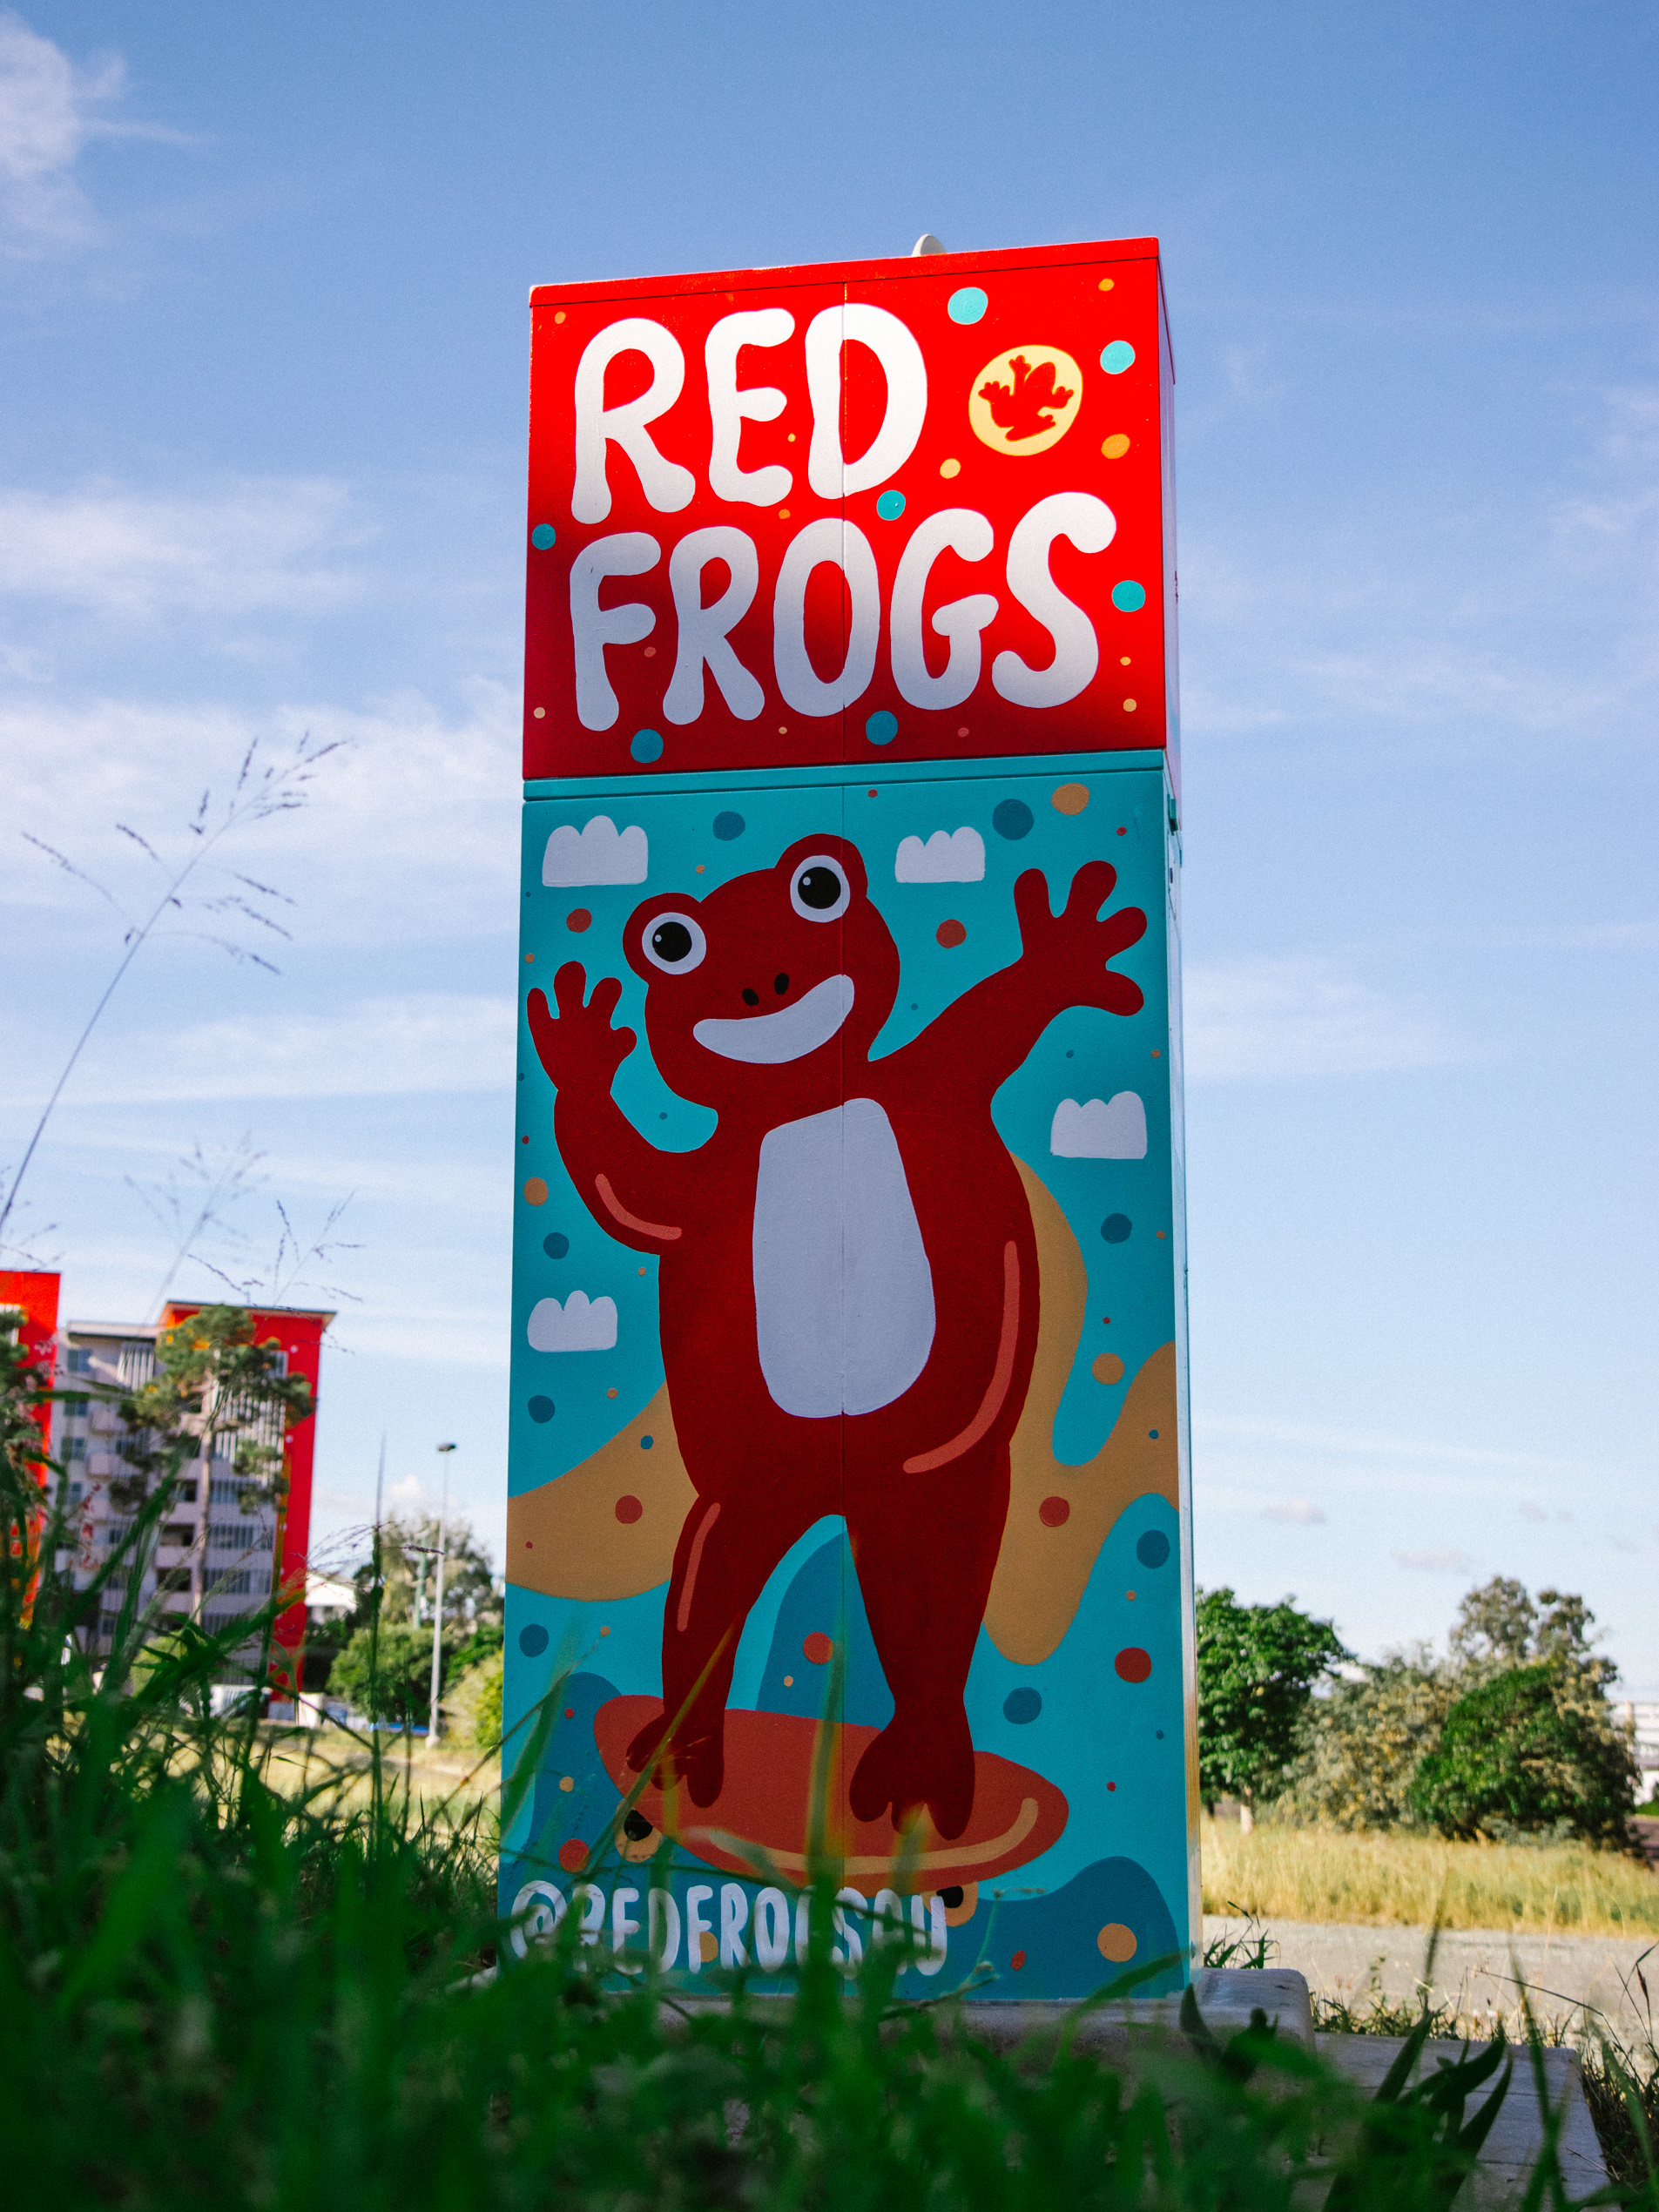 B0640_Annabel-Munro-(Red-Frogs)_Red-Frog-Best-Friends-Since-'97_02